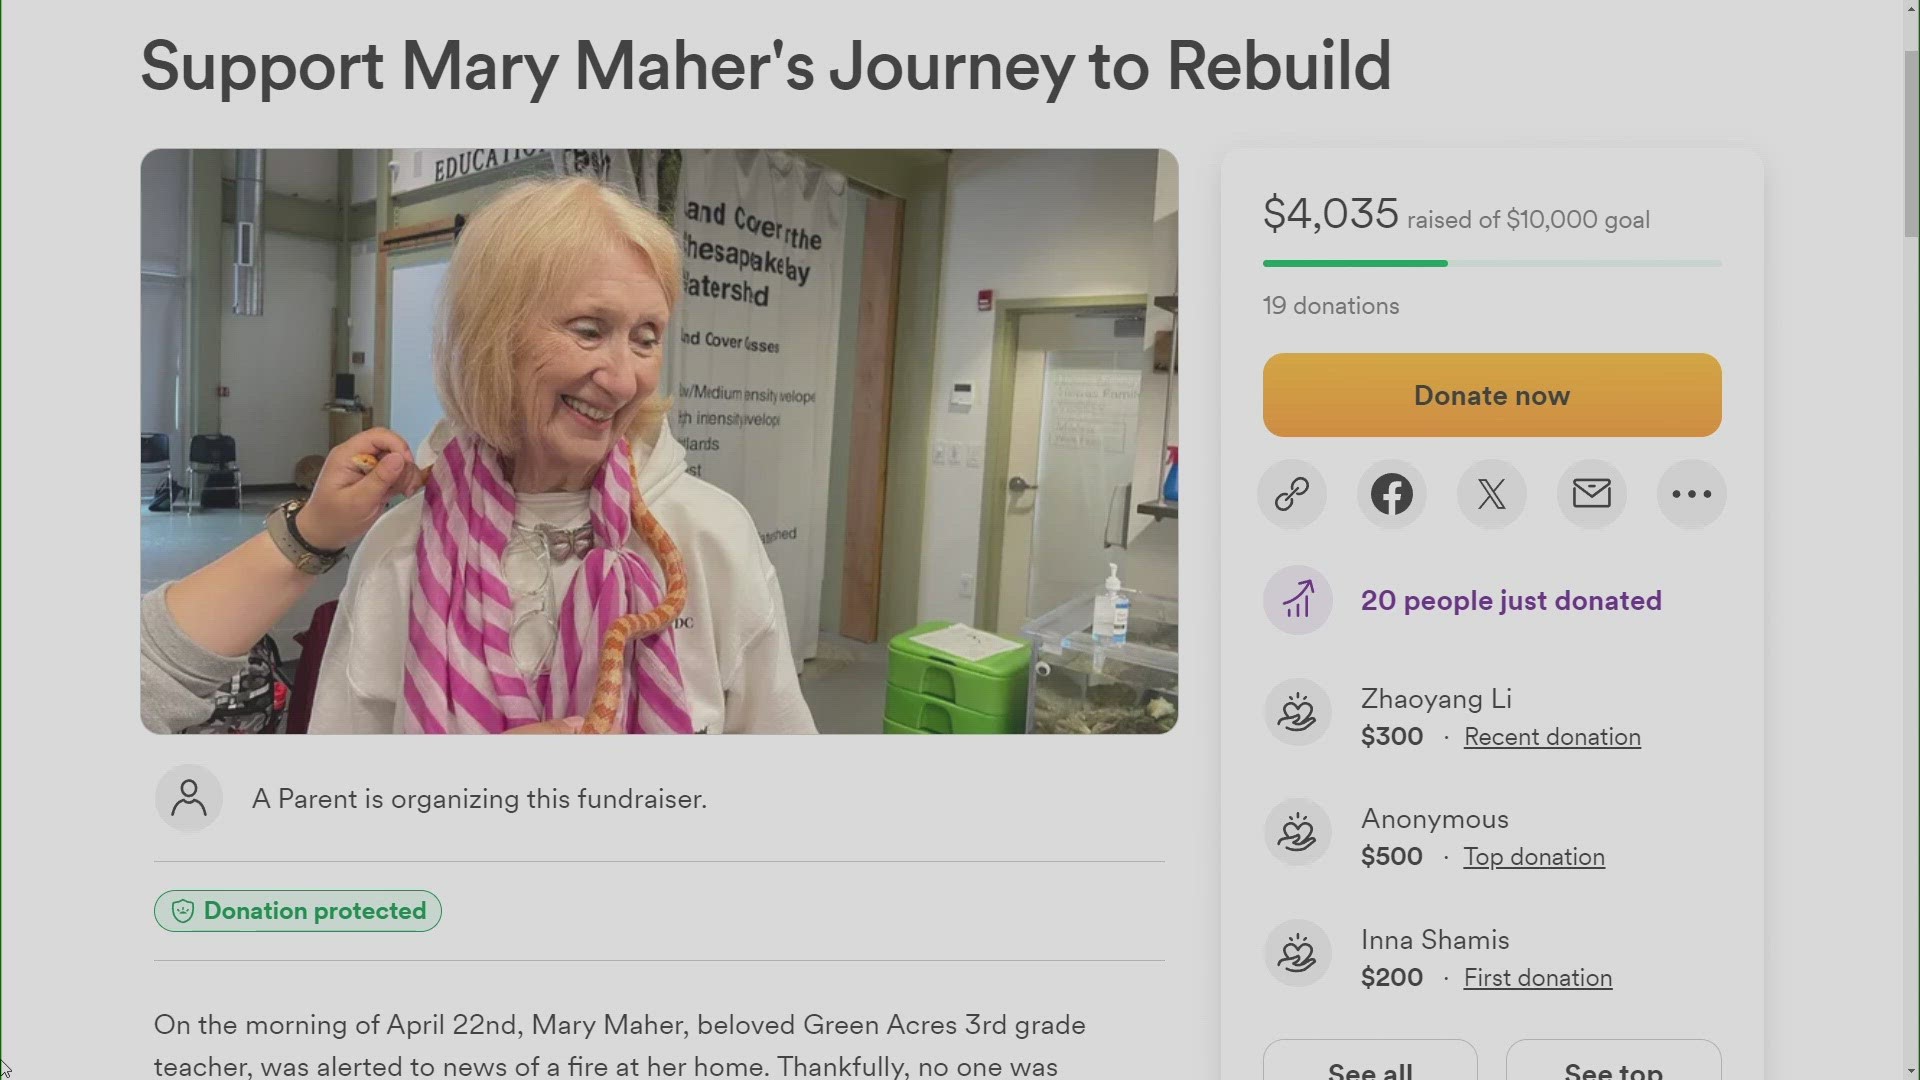 An online fundraiser has been started to help the teacher and her family.